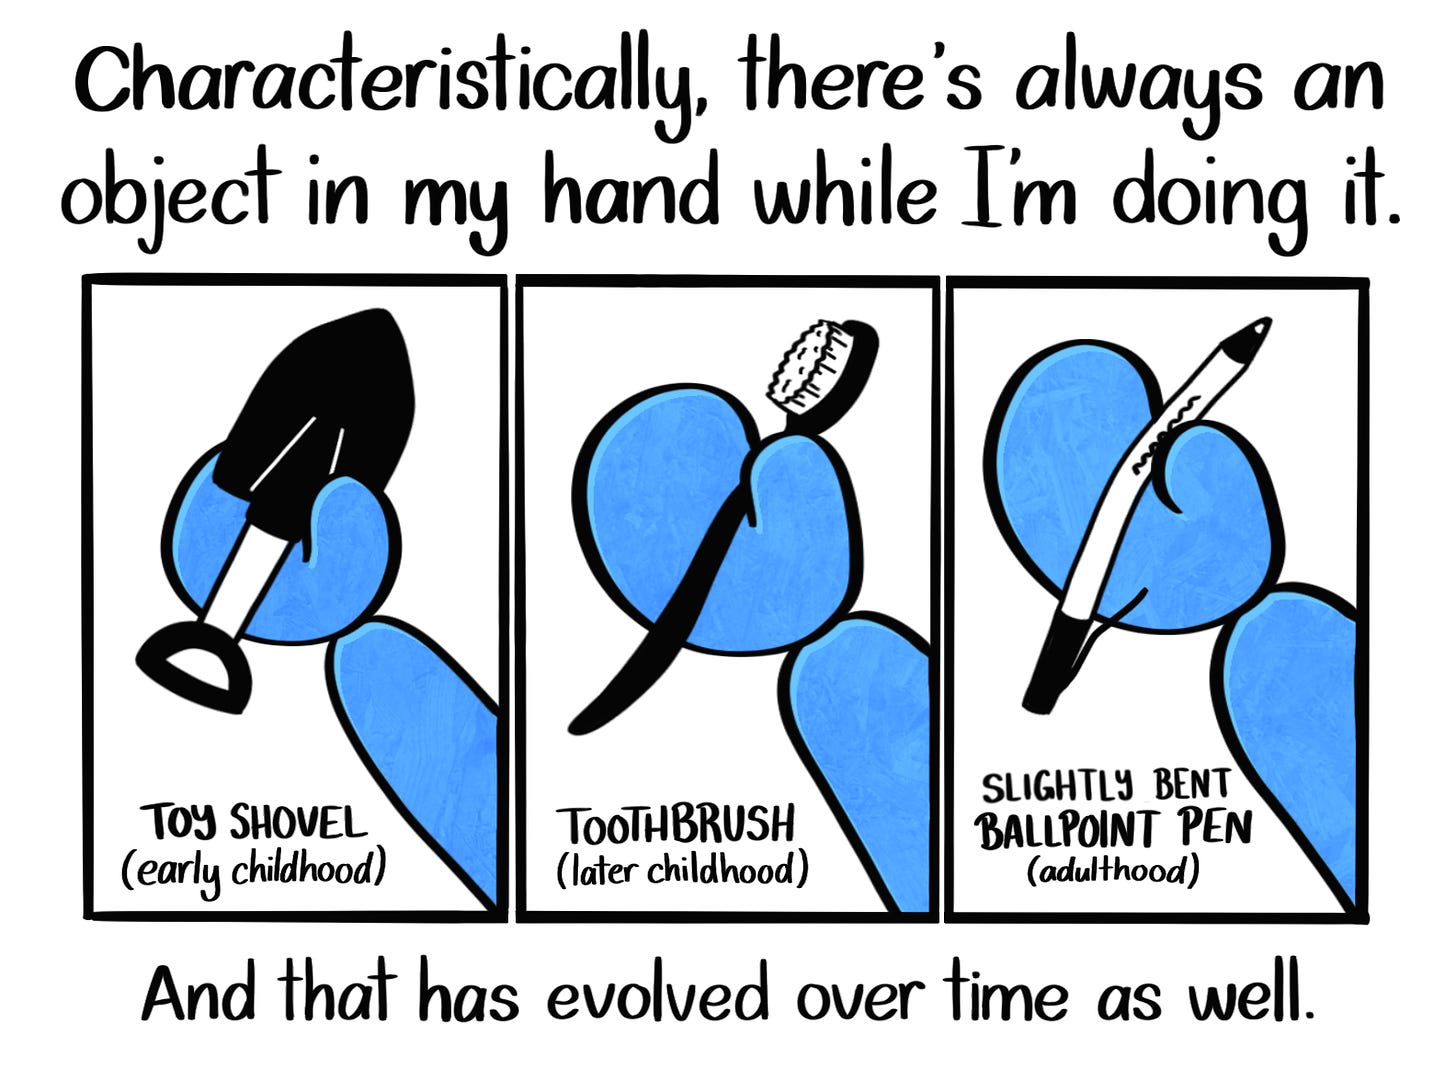 Caption: Characteristically, there has always been an object in my hand while I'm doing it. And that has evolved over time as well. Image: Three panels, each showing different objects in the Blue Person's hand. The first one shows a toy shovel, the second shows a toothbrush, and the third shows a slightly bent ballpoint pen.